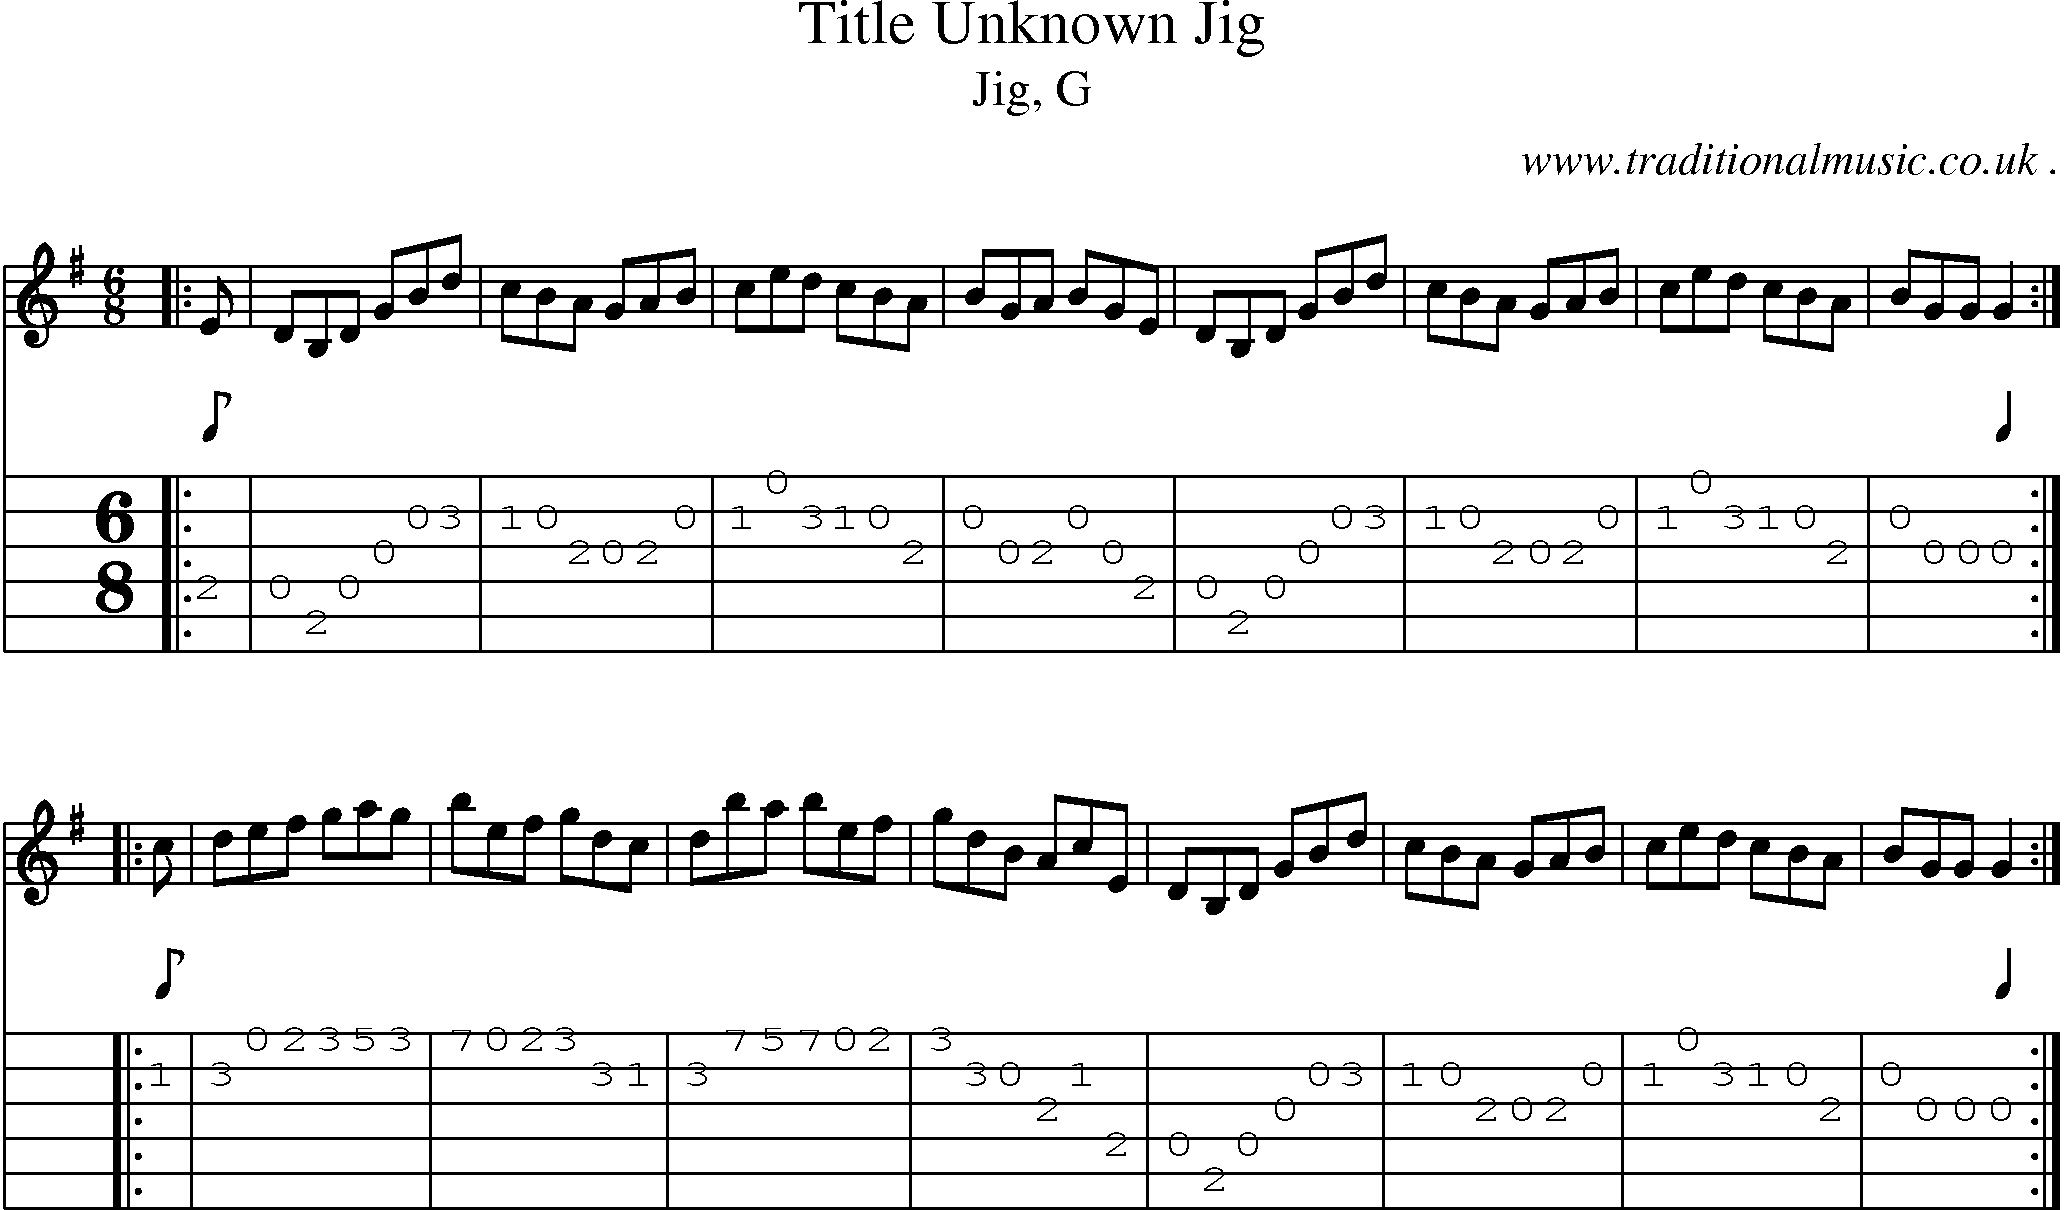 Sheet-music  score, Chords and Guitar Tabs for Title Unknown Jig